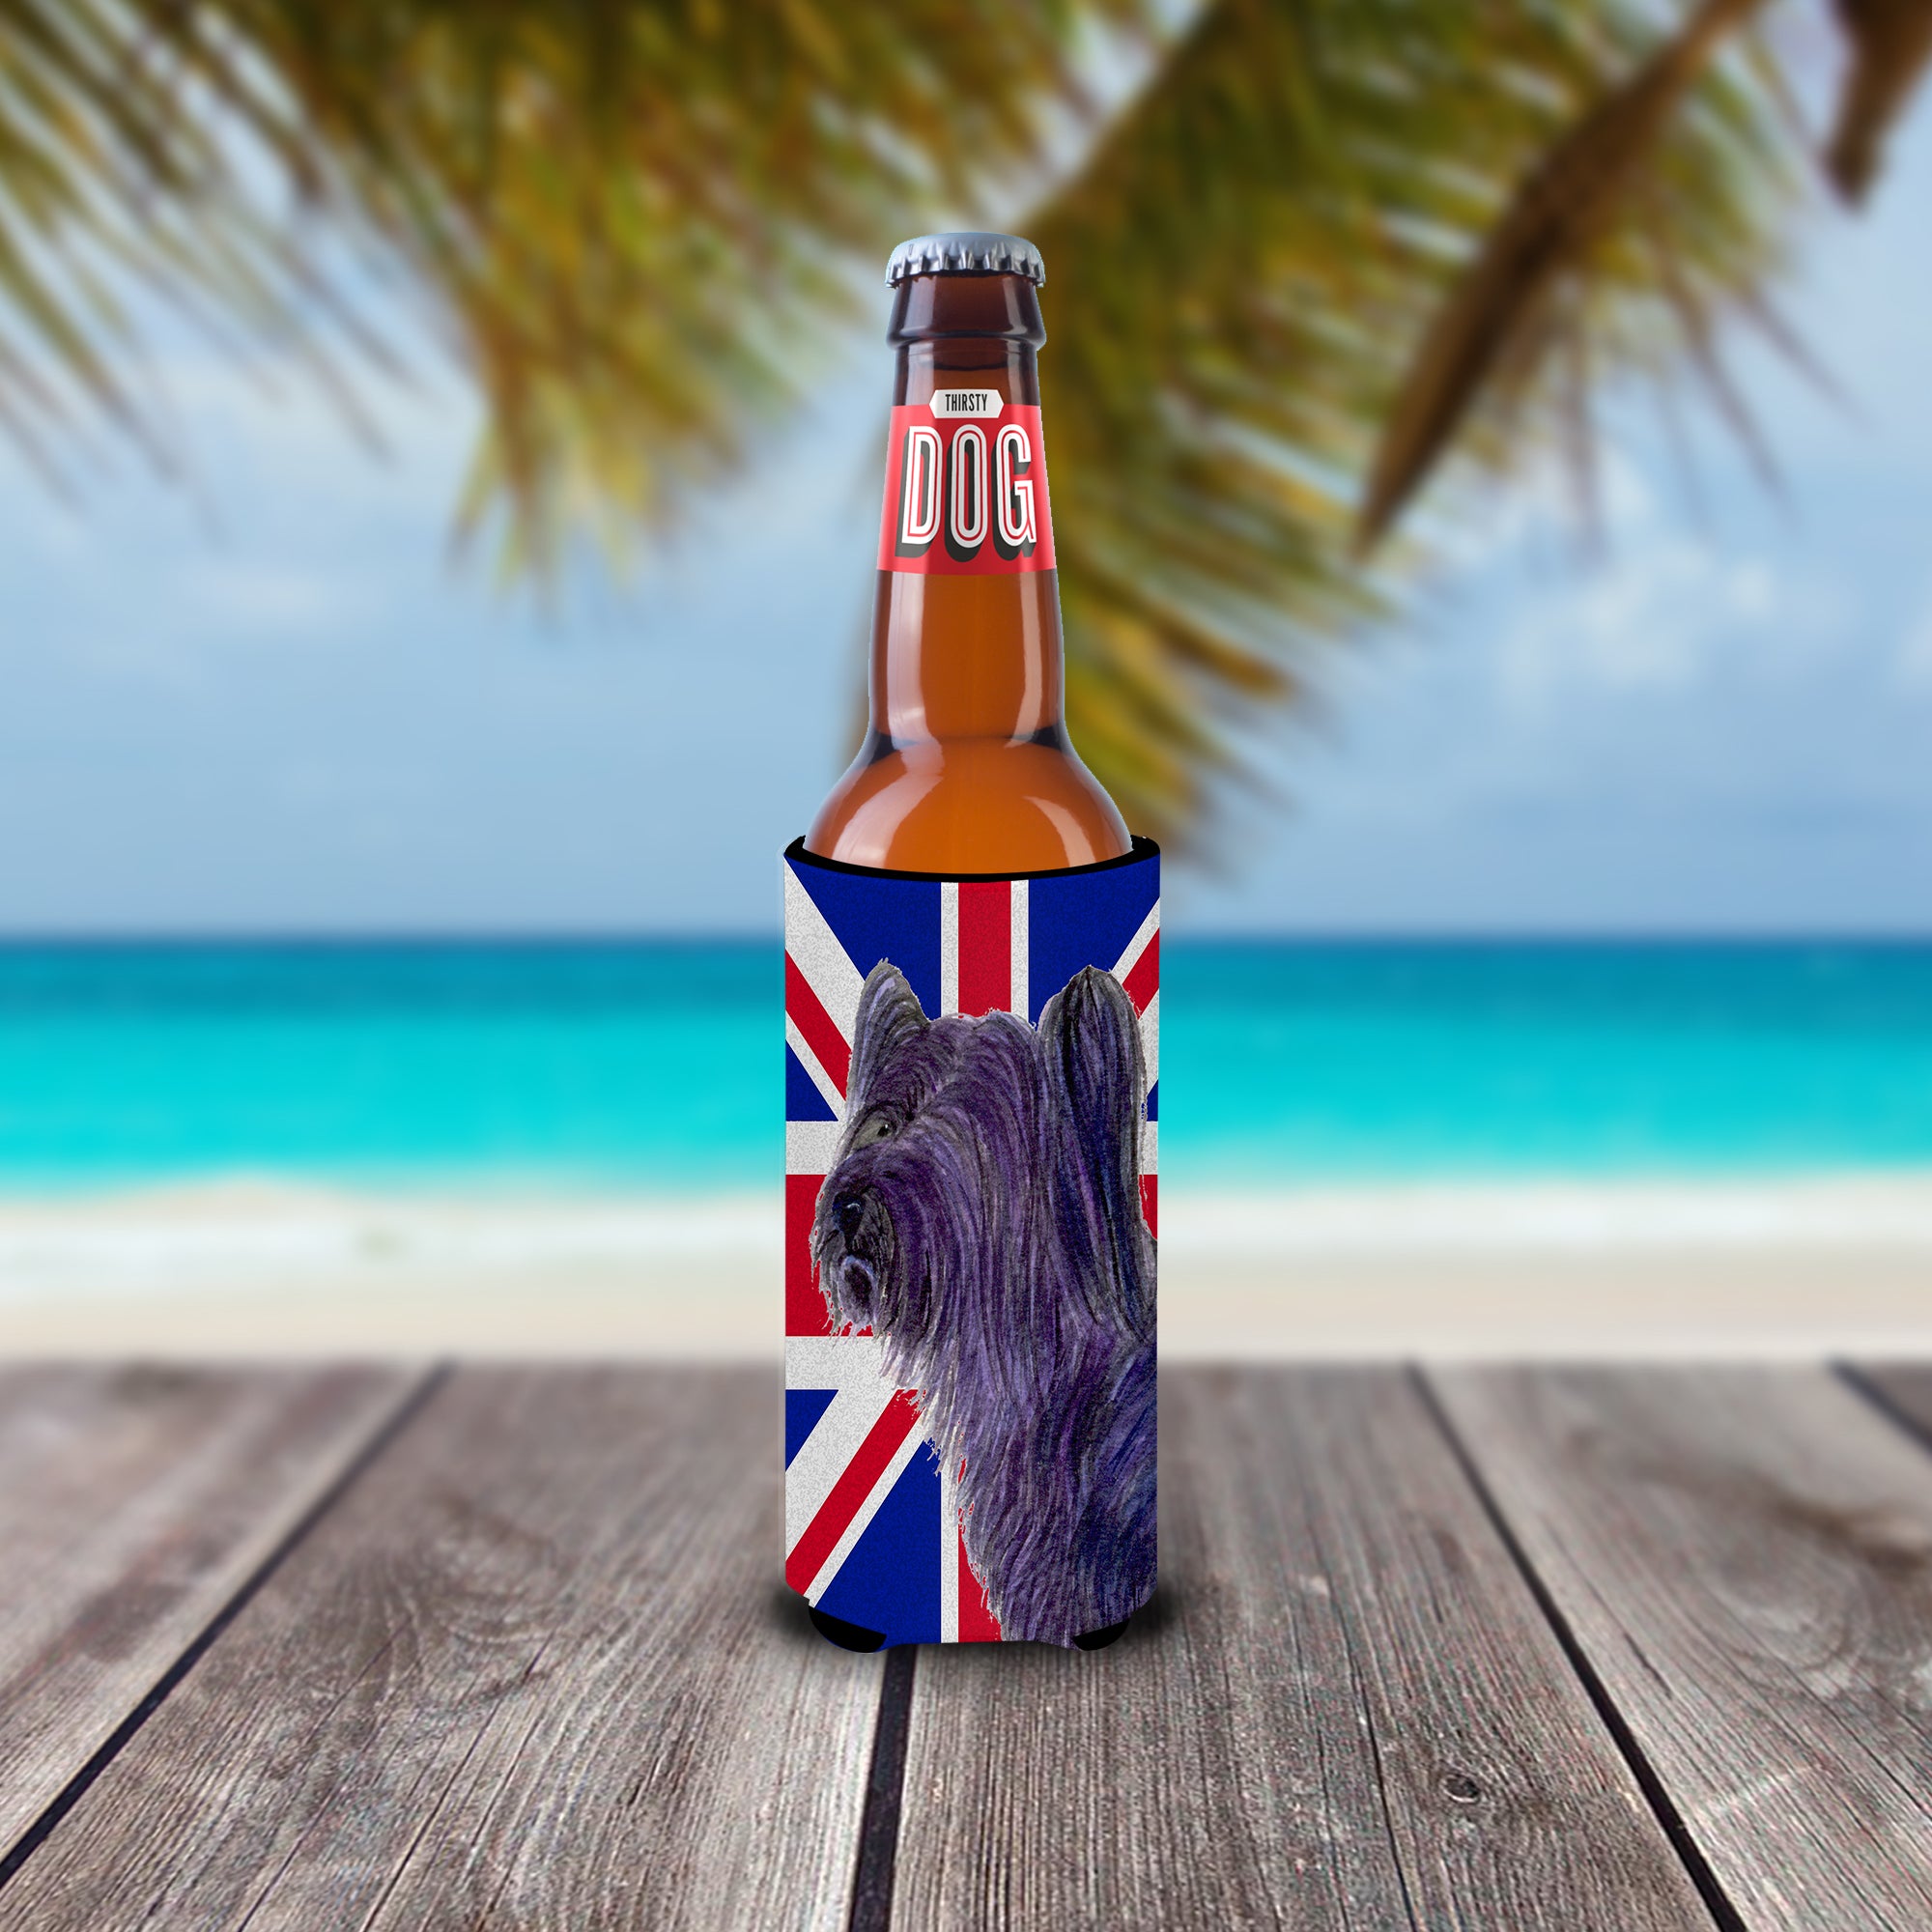 Skye Terrier with English Union Jack British Flag Ultra Beverage Insulators for slim cans SS4905MUK.